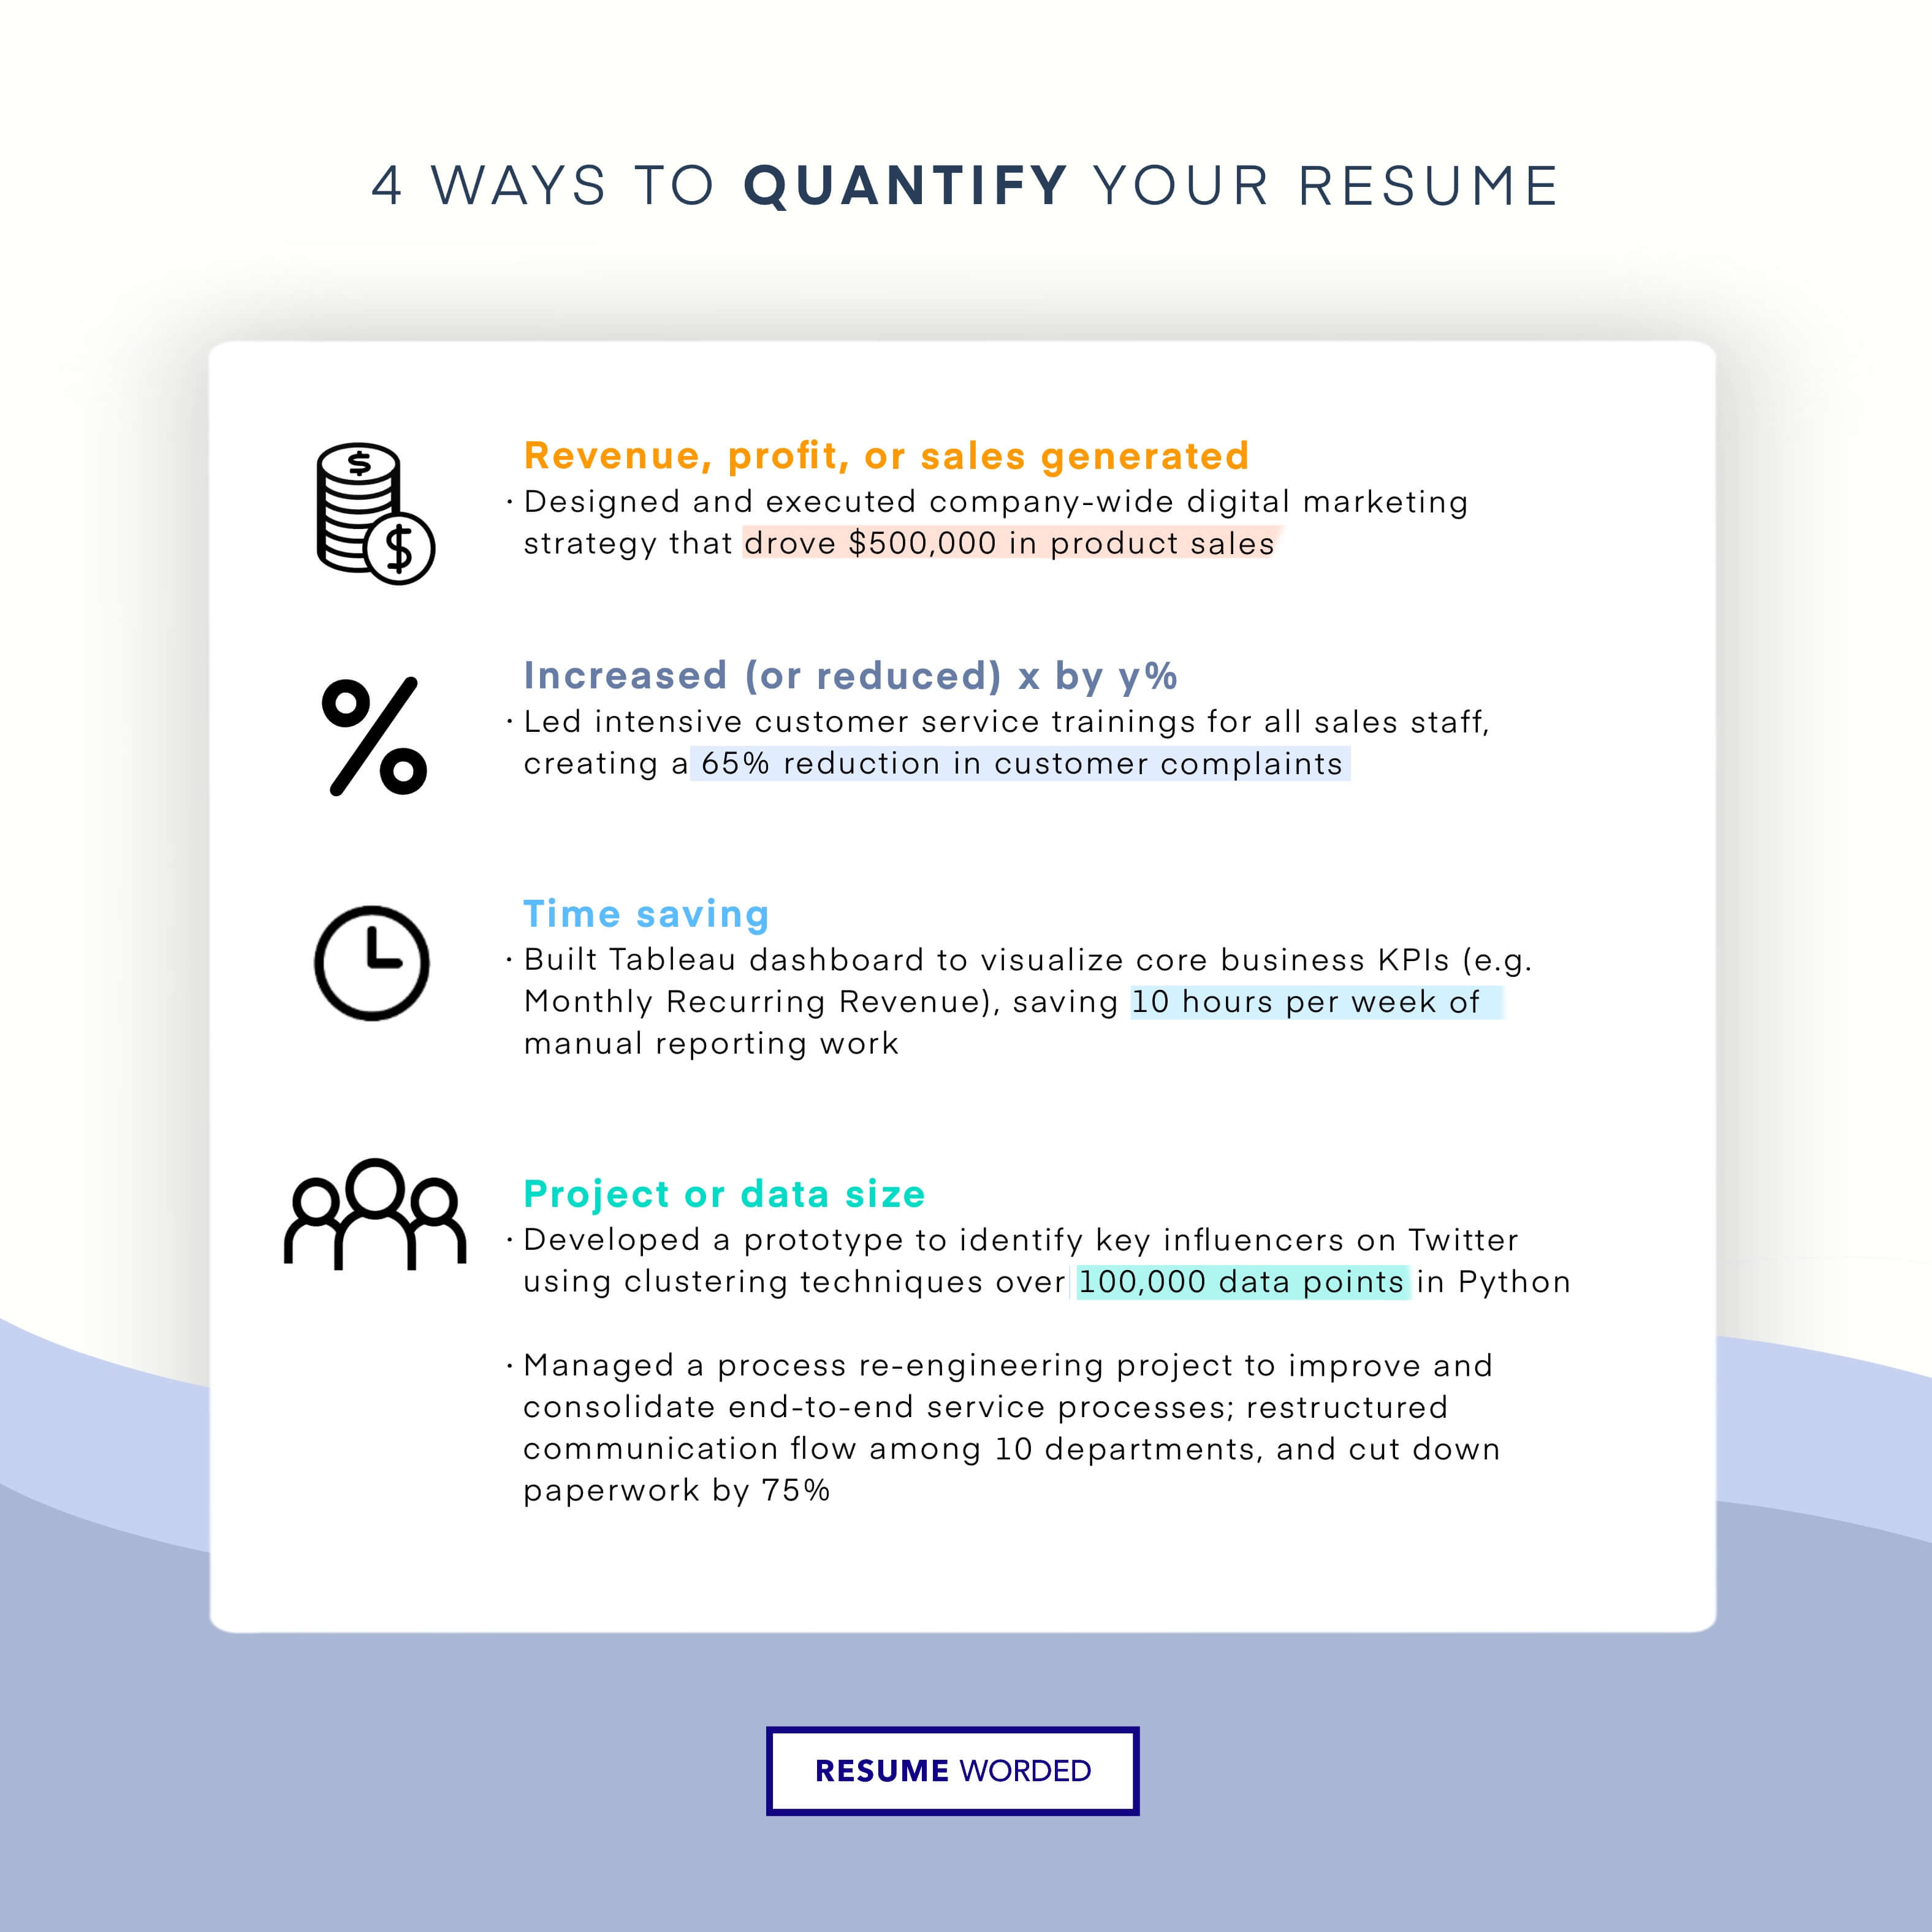 Quantify your accomplishments and project results - Sales Administrative Assistant Resume